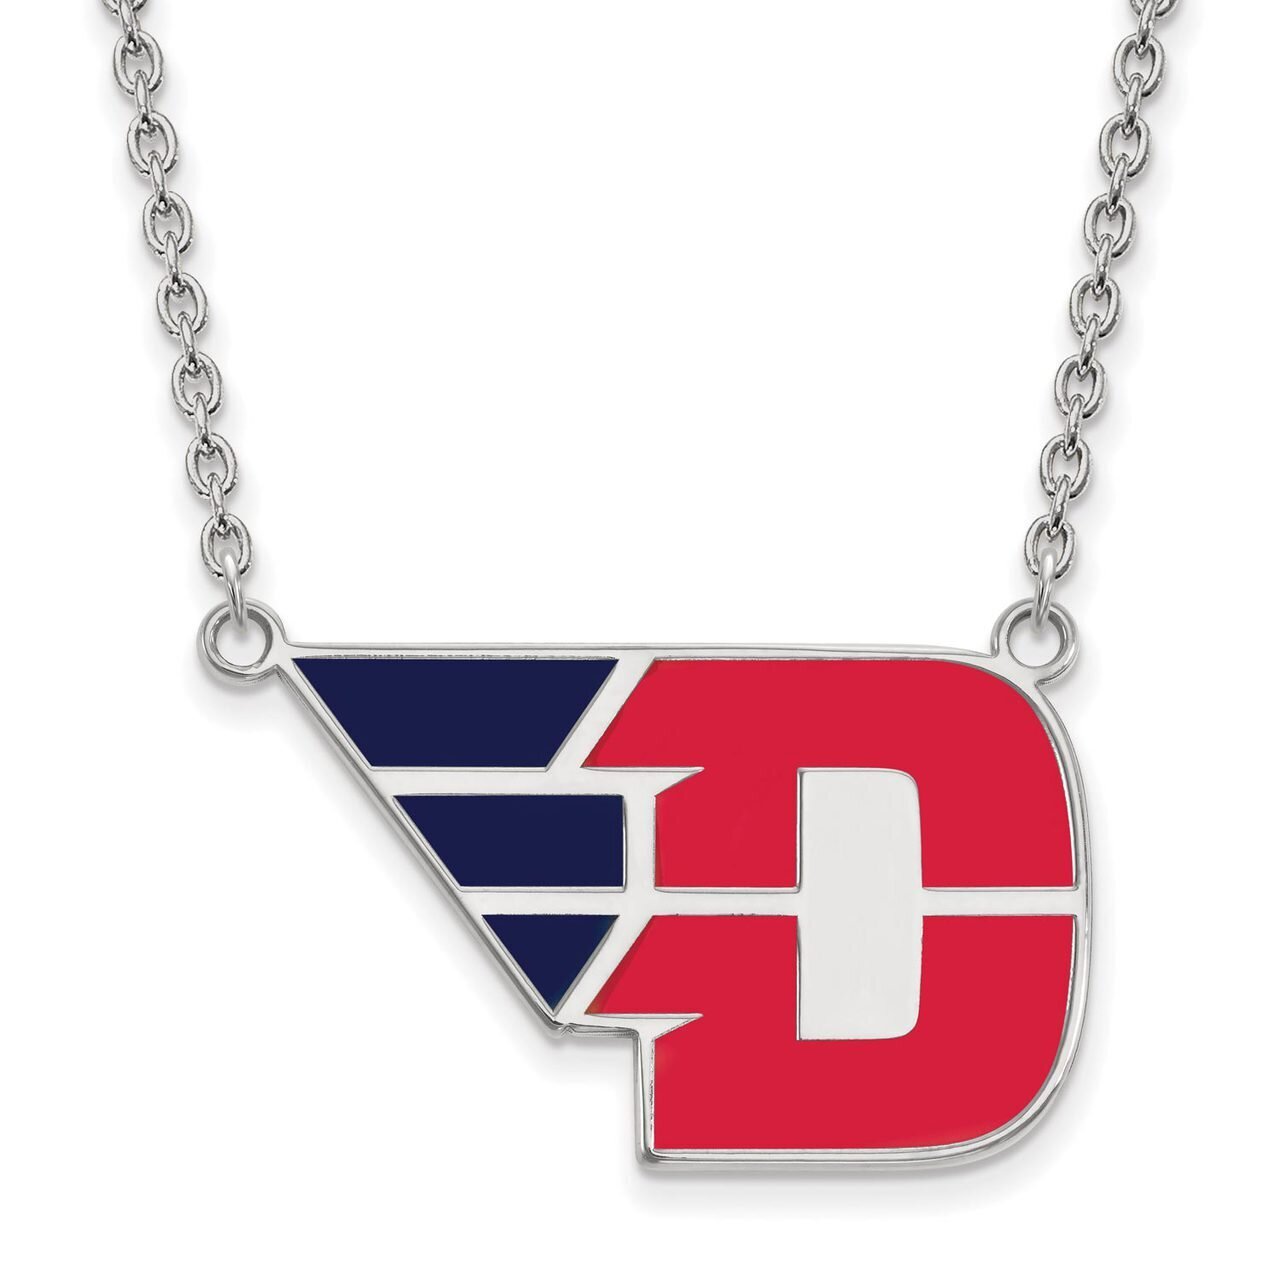 University of Dayton Large Enamel Pendant with Necklace Sterling Silver SS020UD